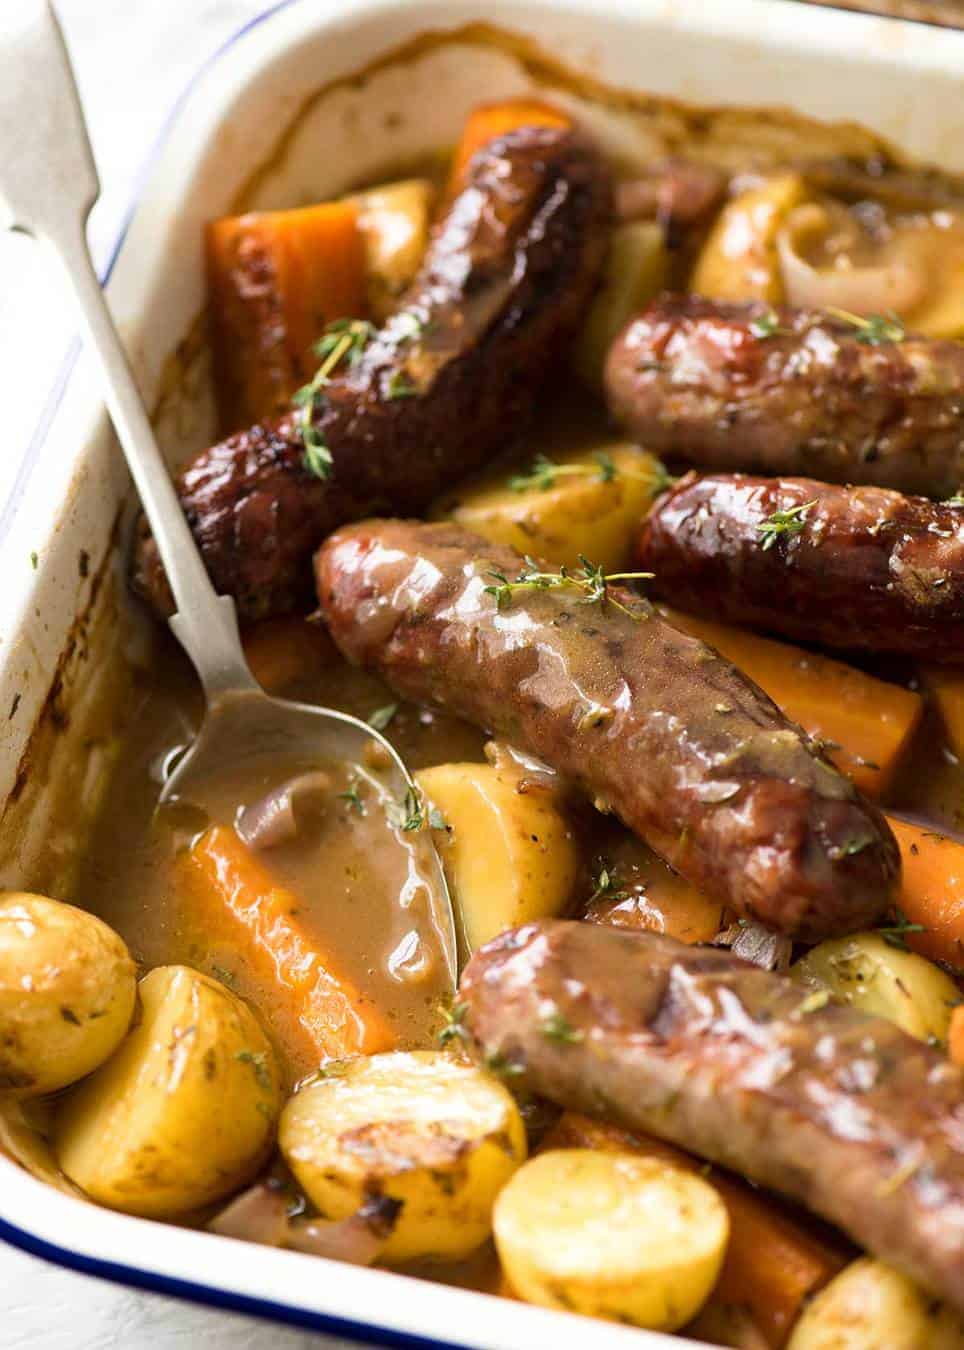 A Sausage Bake and Vegetables WITH Gravy, all made in one pan! Yes, that